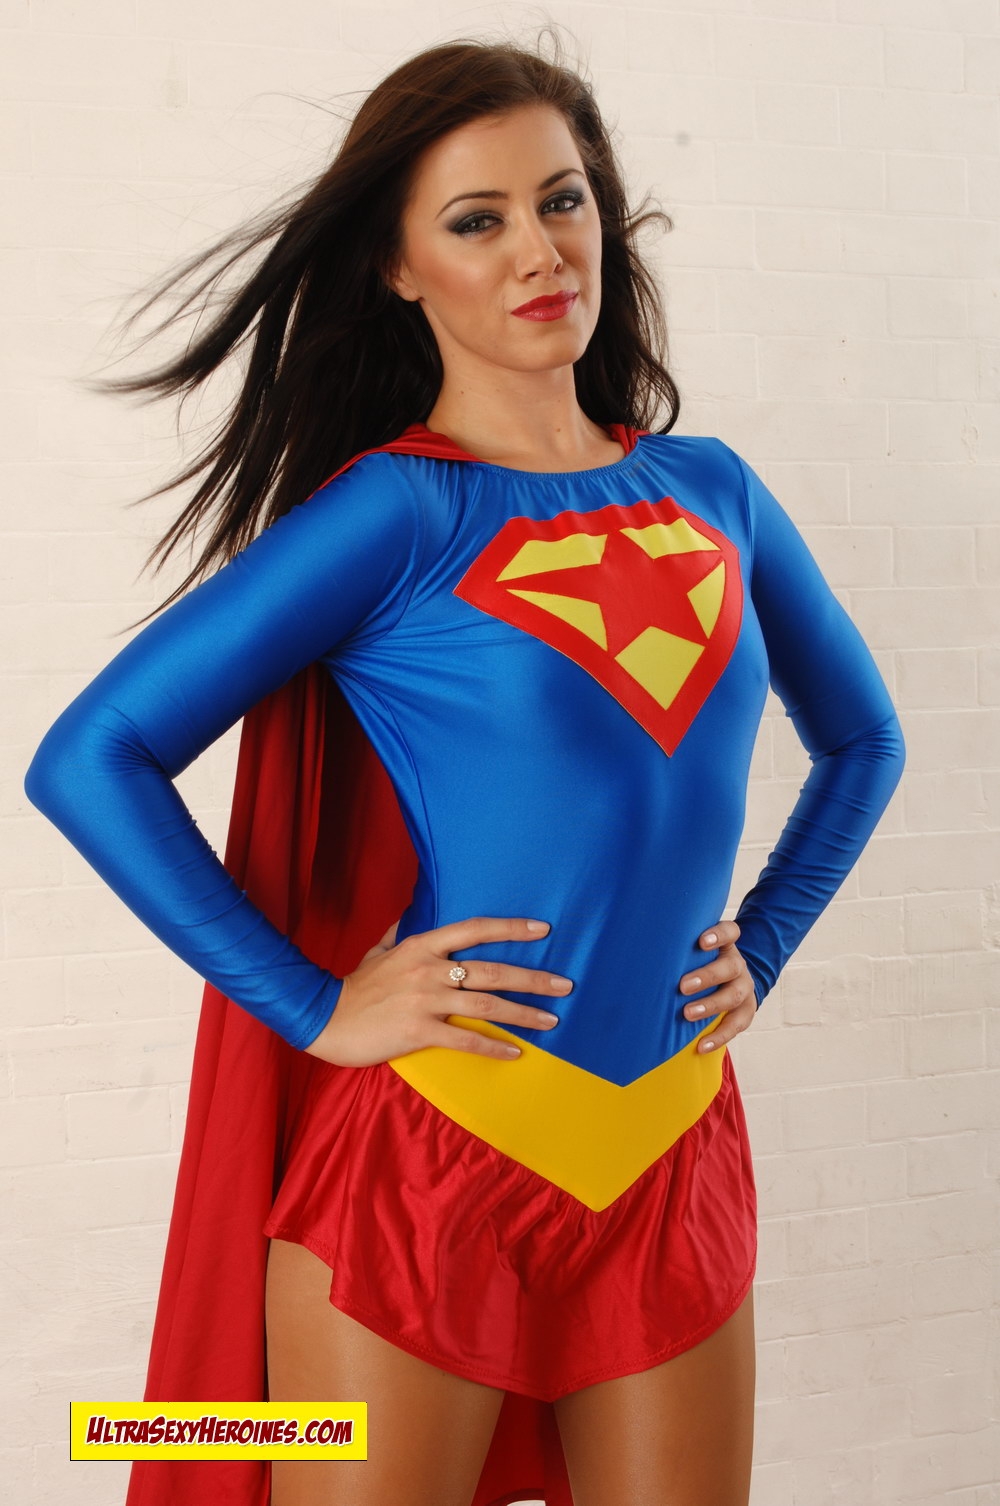 [UltraSexyHeroines] Super Heroine Cosplay Nude - Holly 64